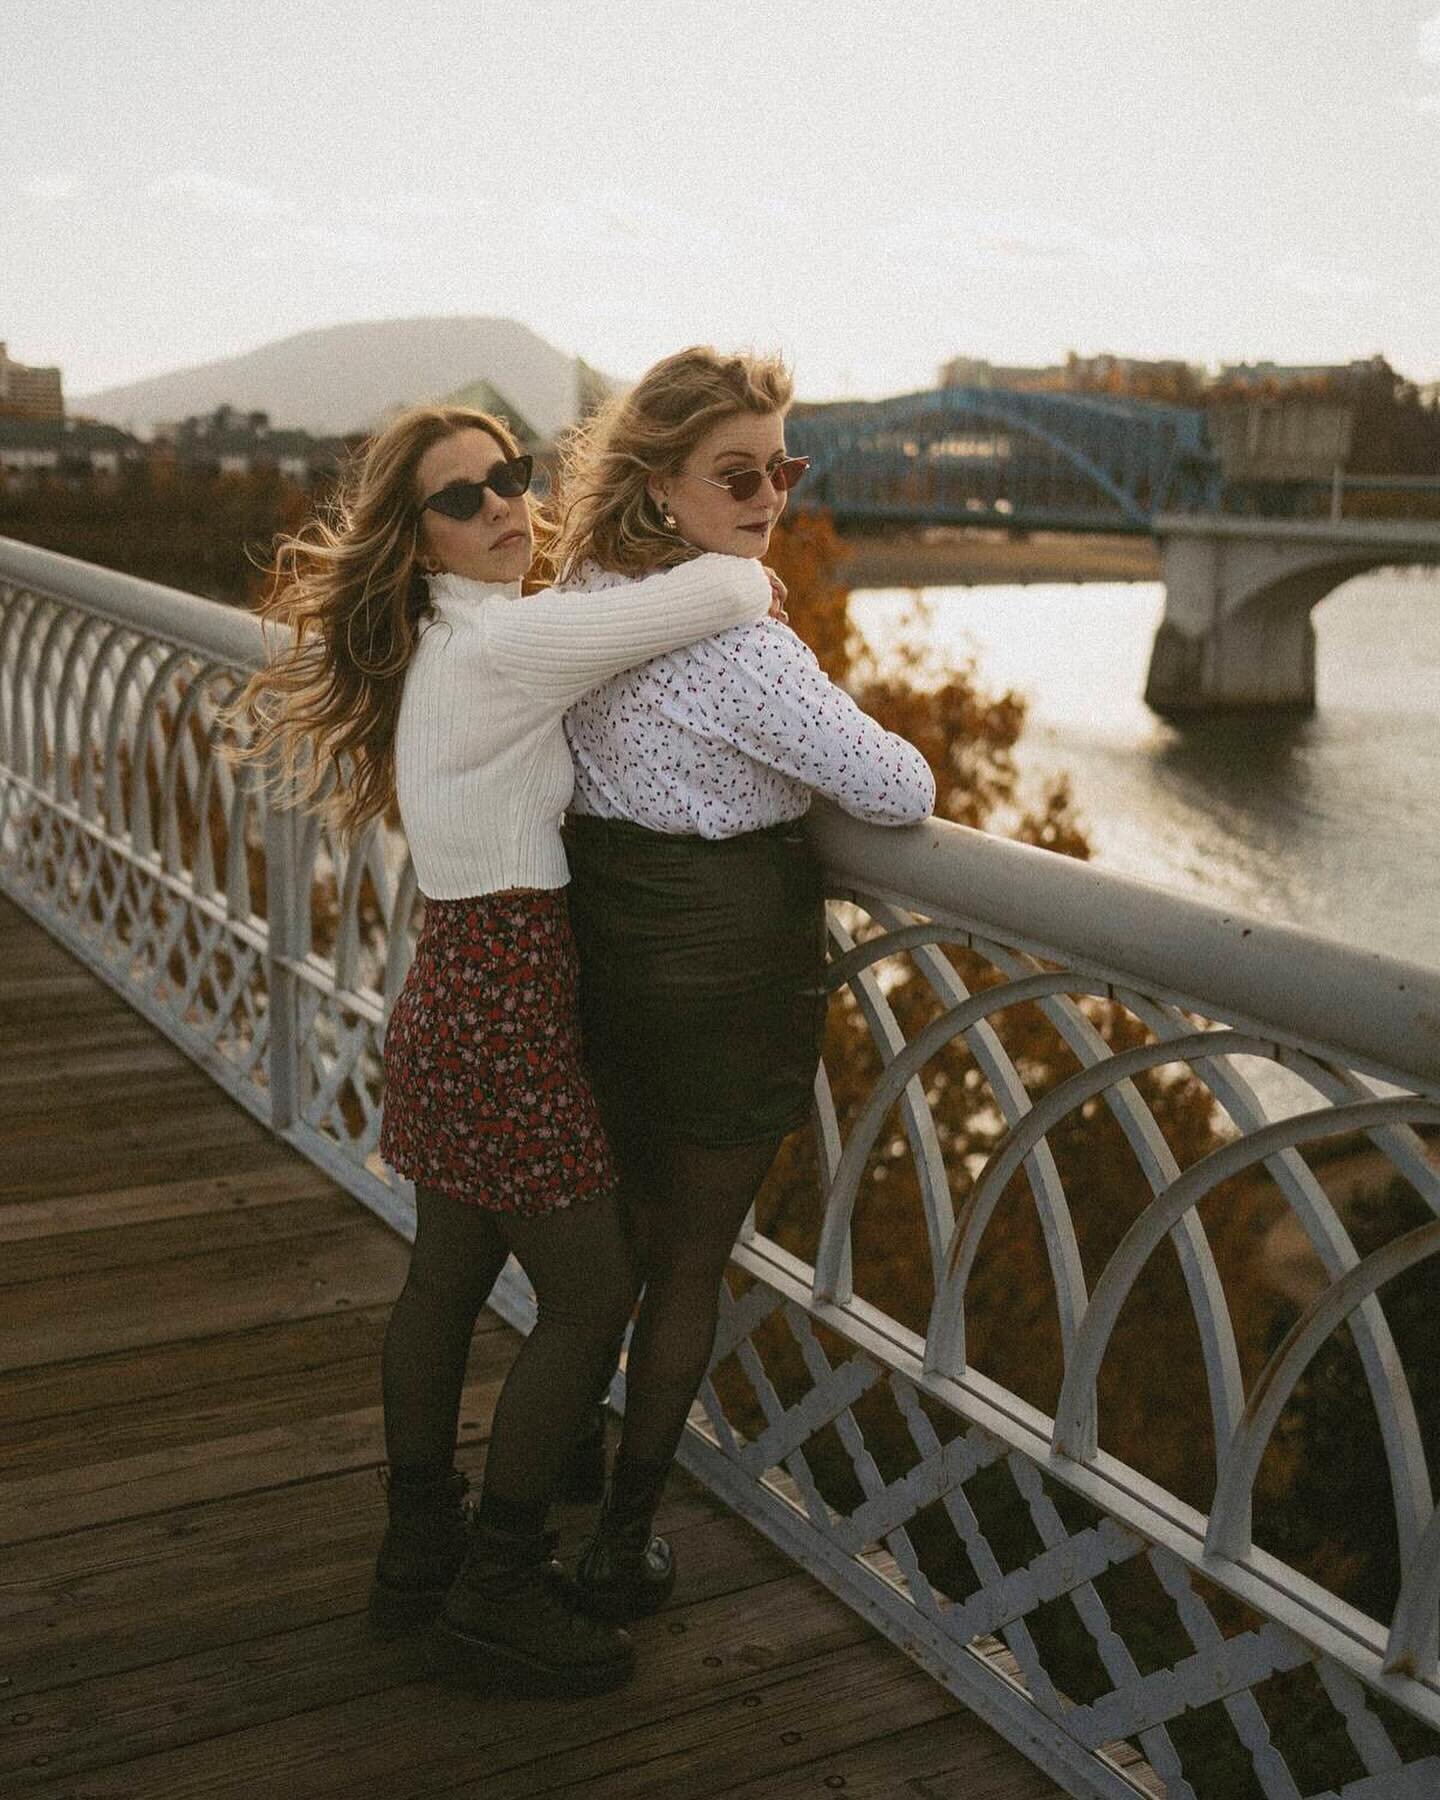 After we snapped some adorable family shots with the pets, Summer + Lainey did a quick outfit change and we went for a chilly afternoon walk through Chattanooga. These two could make Alaska look hot. 🥵🔥